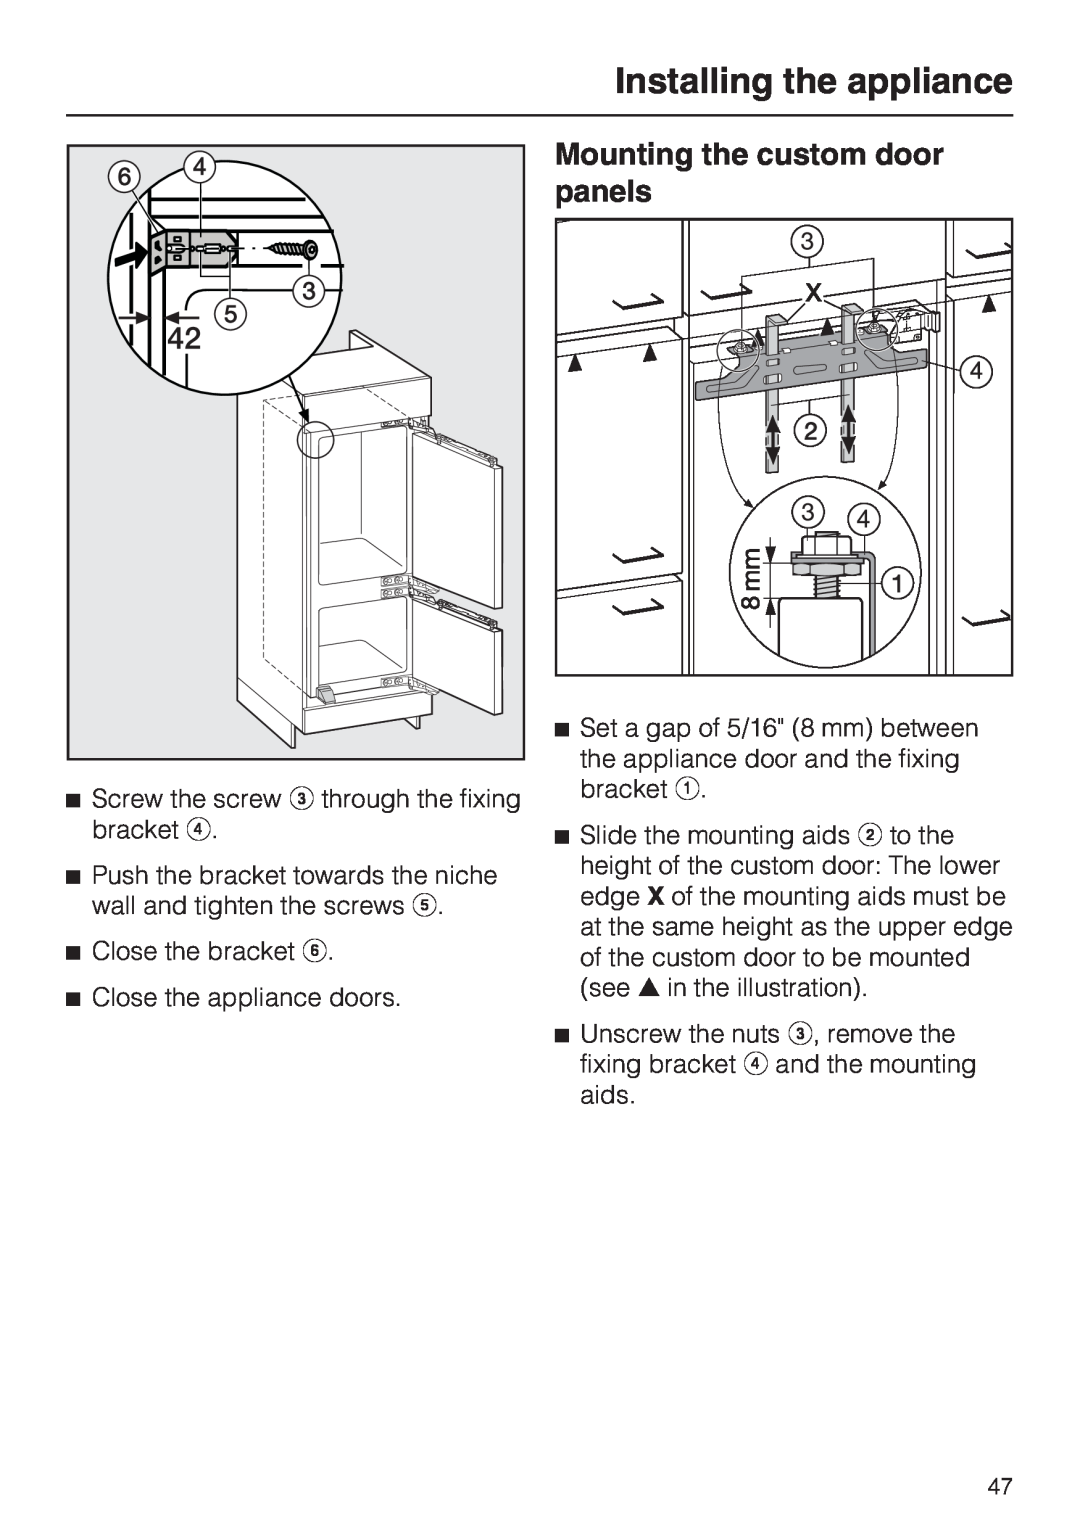 Miele KFN 9753 ID installation instructions Mounting the custom door panels, Installing the appliance 